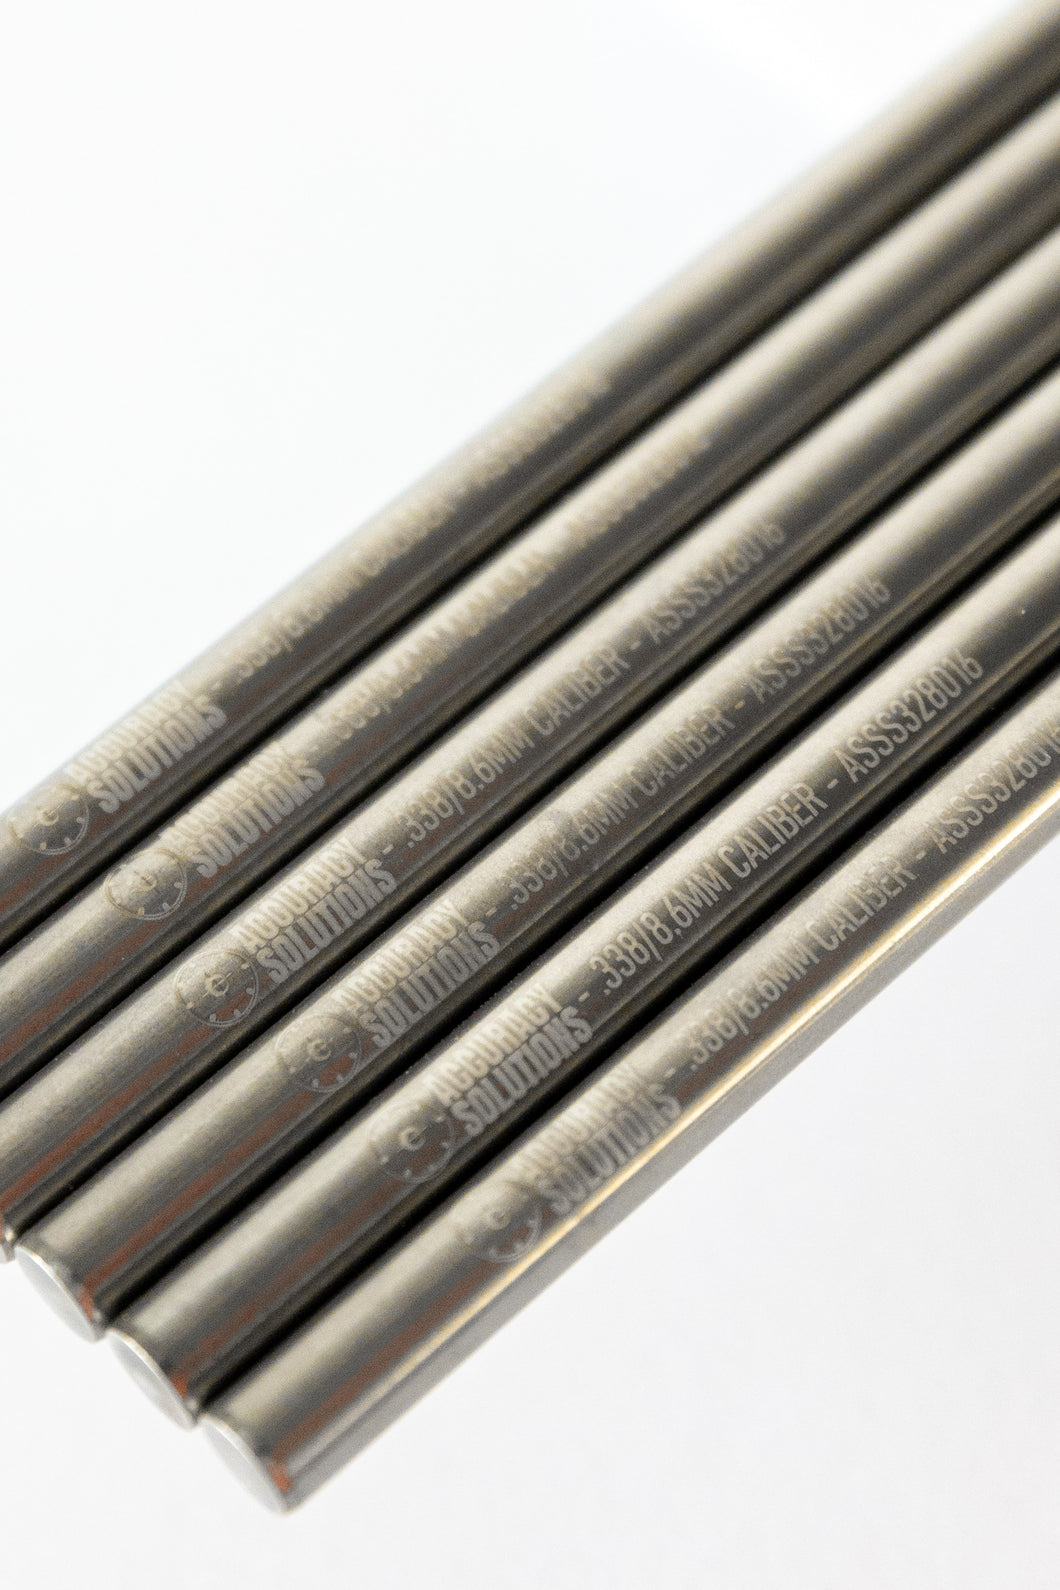 .338/8.6 Blackout Stainless Steel Bore Alignment Rod